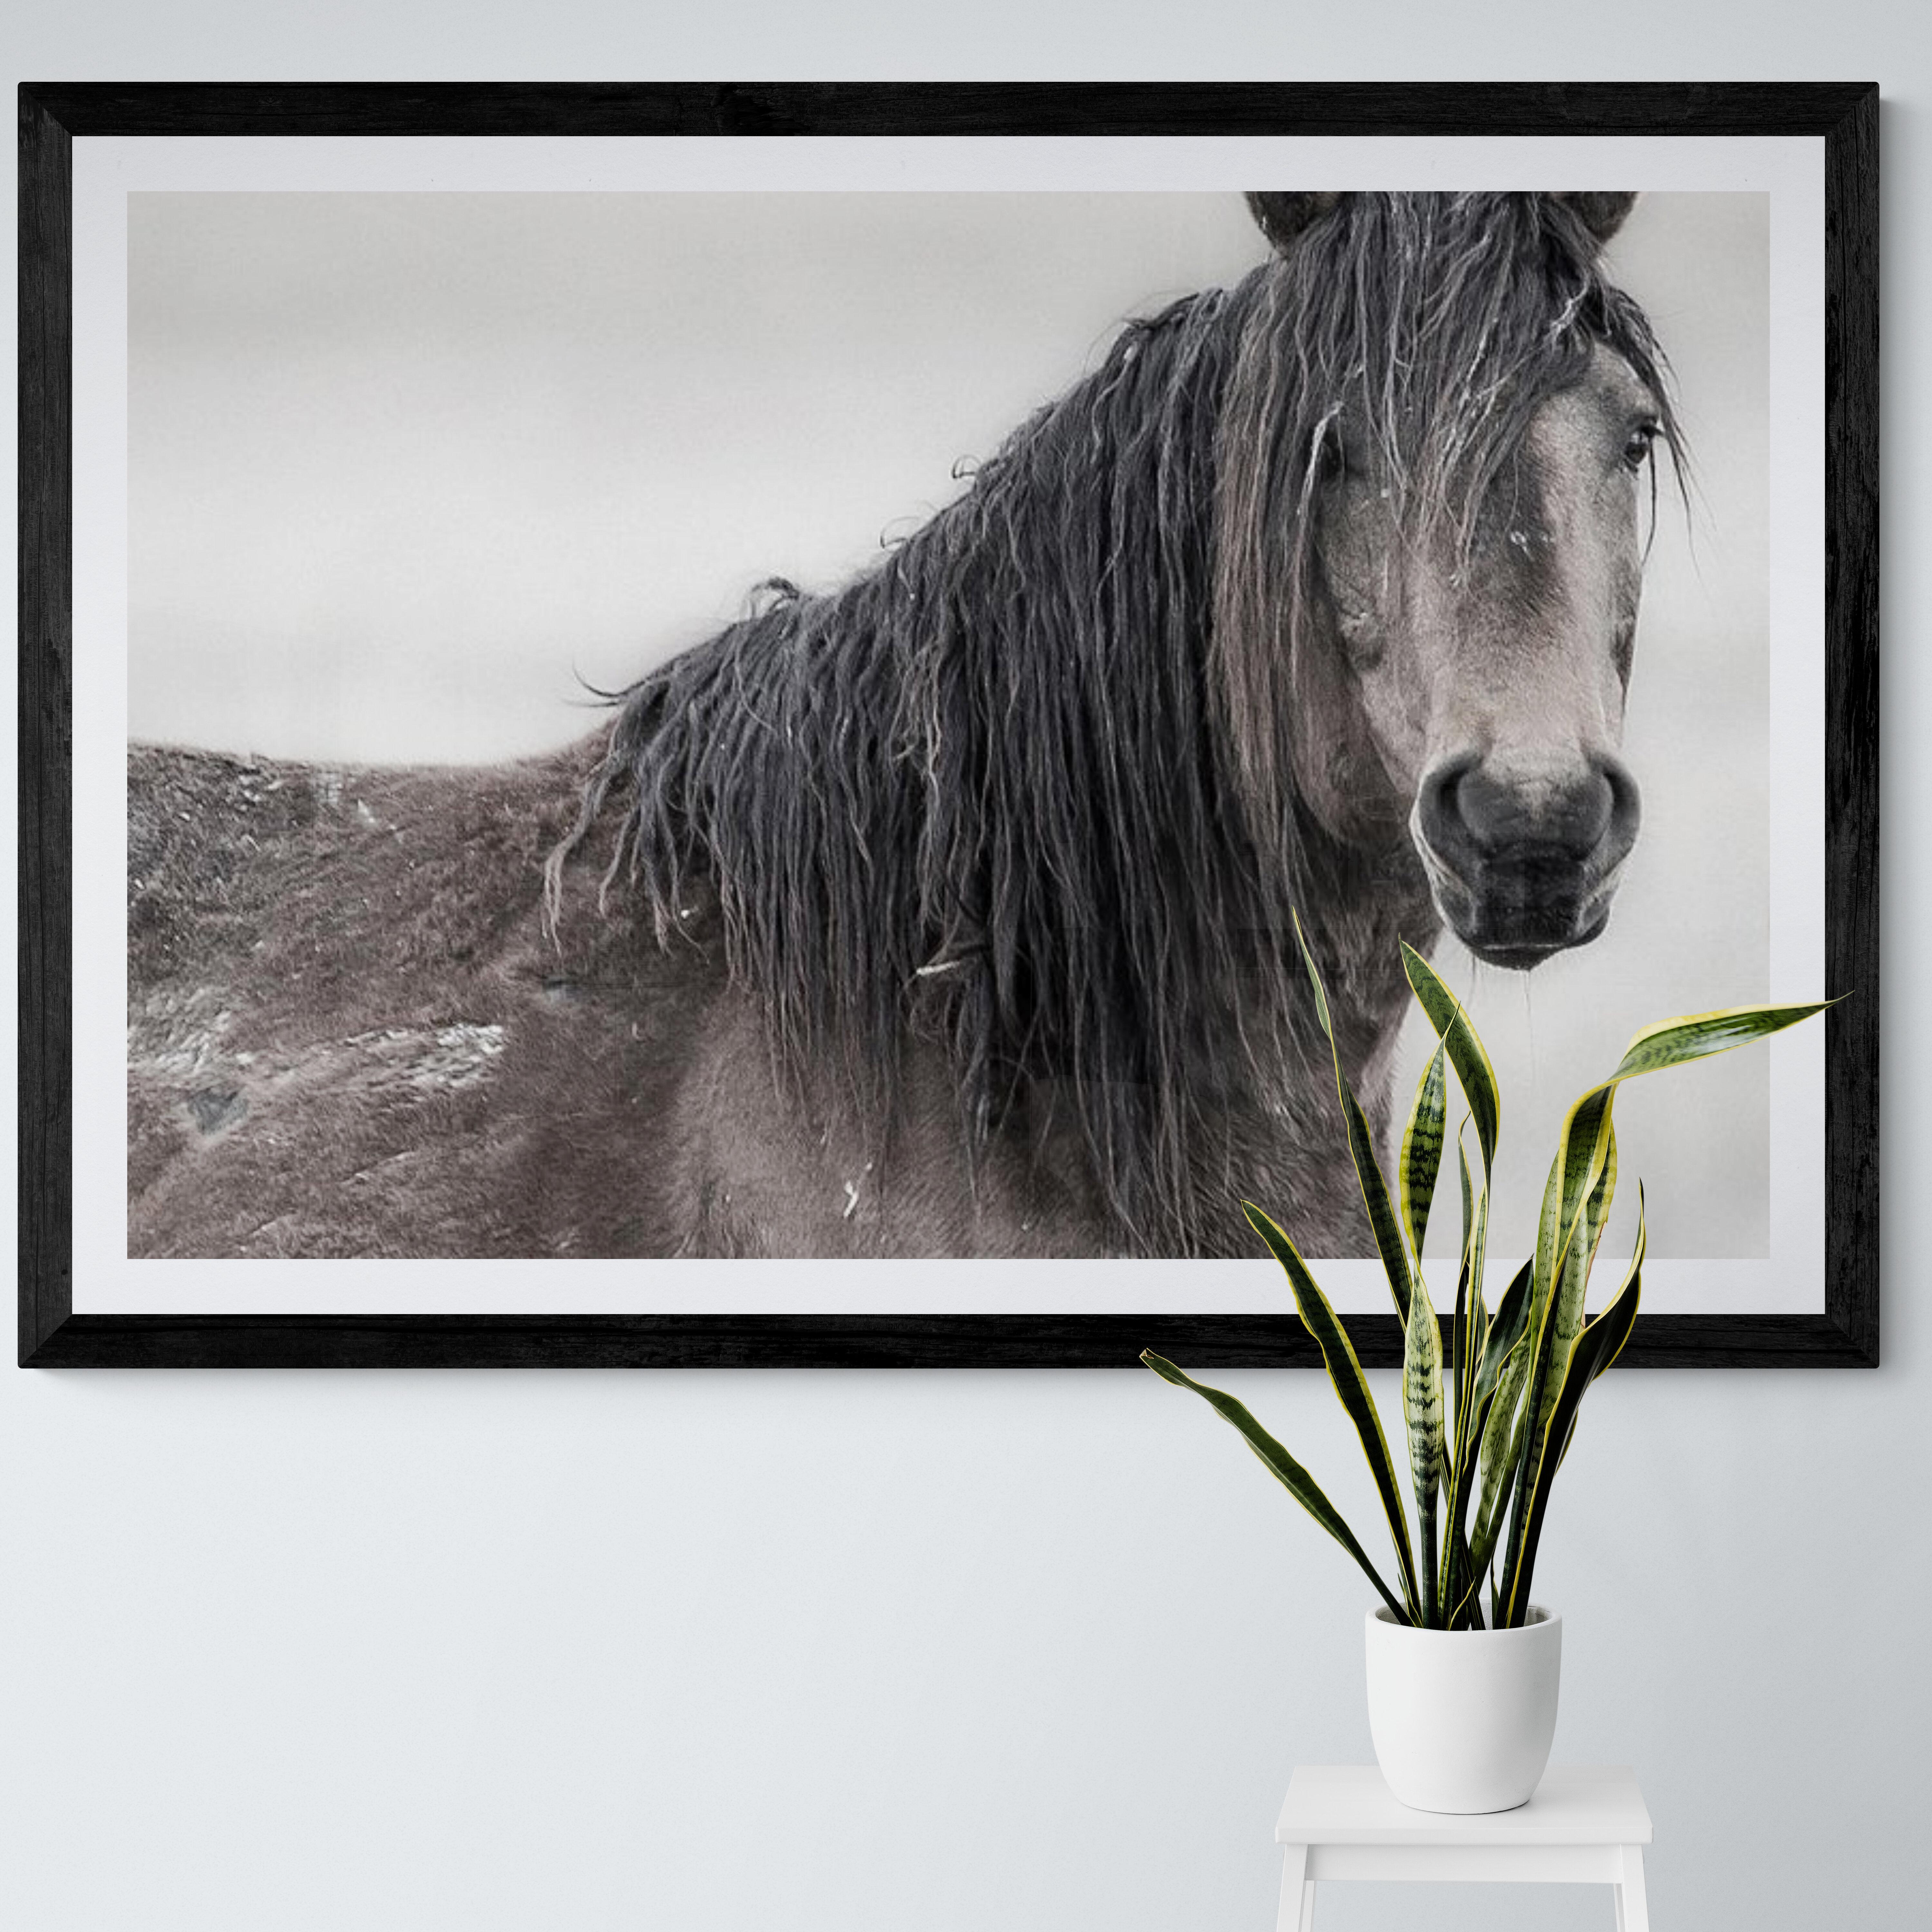 This is a contemporary black and white photograph of North American Wild Horses
Photography by Shane Russeck
Printed on archival luster paper 
Edition of 12 singed ad numbered by artist 
40